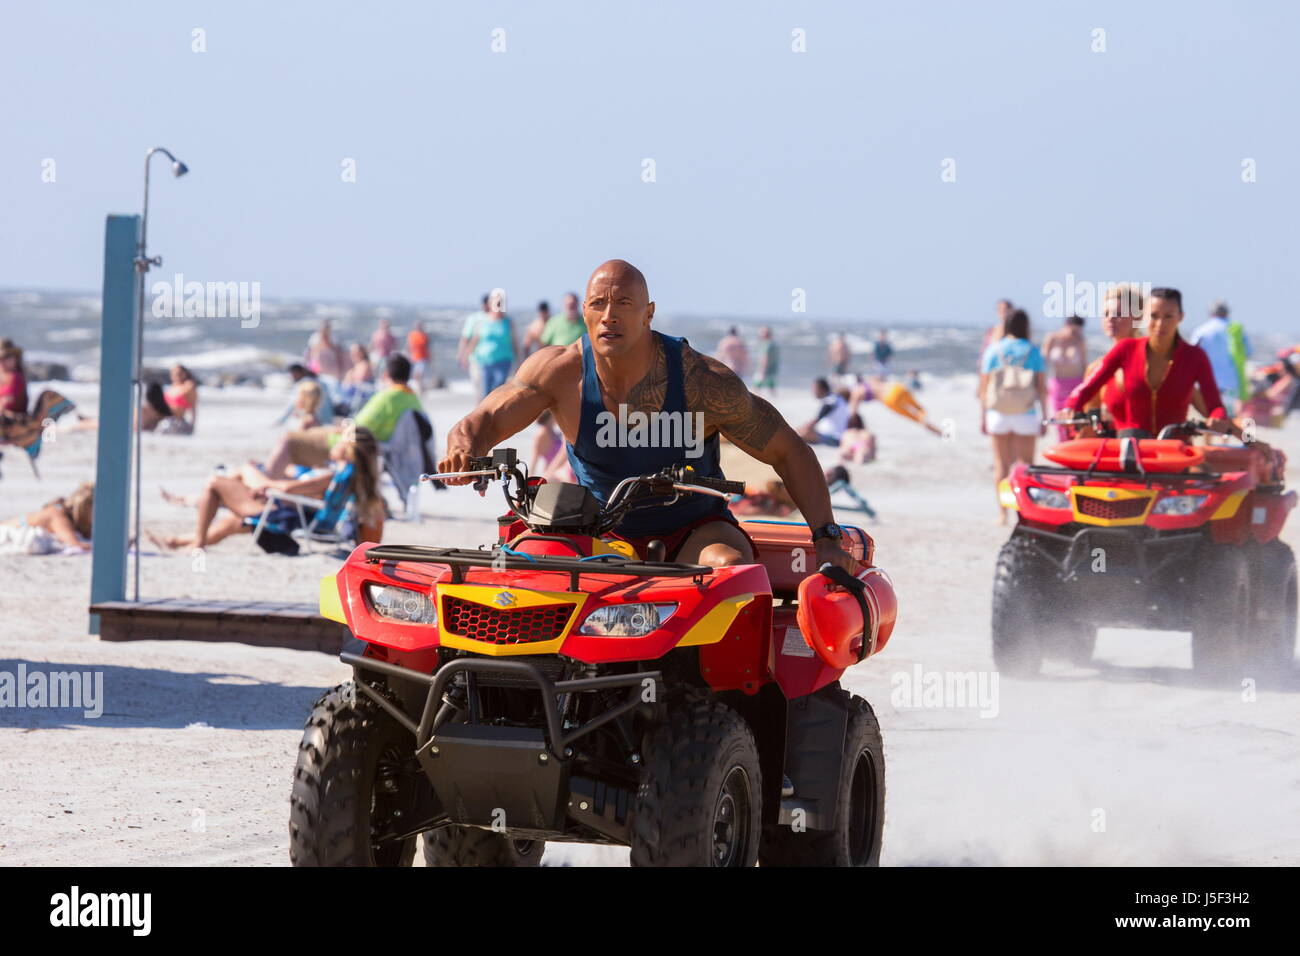 RELEASE DATE: May 26, 2017 TITLE: Baywatch STUDIO: Paramount Pictures DIRECTOR: Seth Gordon PLOT: Two unlikely prospective lifeguards vie for jobs alongside the buff bodies who patrol a beach in California STARRING: Dwayne Johnson. (Credit: Paramount Pictures/Entertainment Pictures Stock Photo